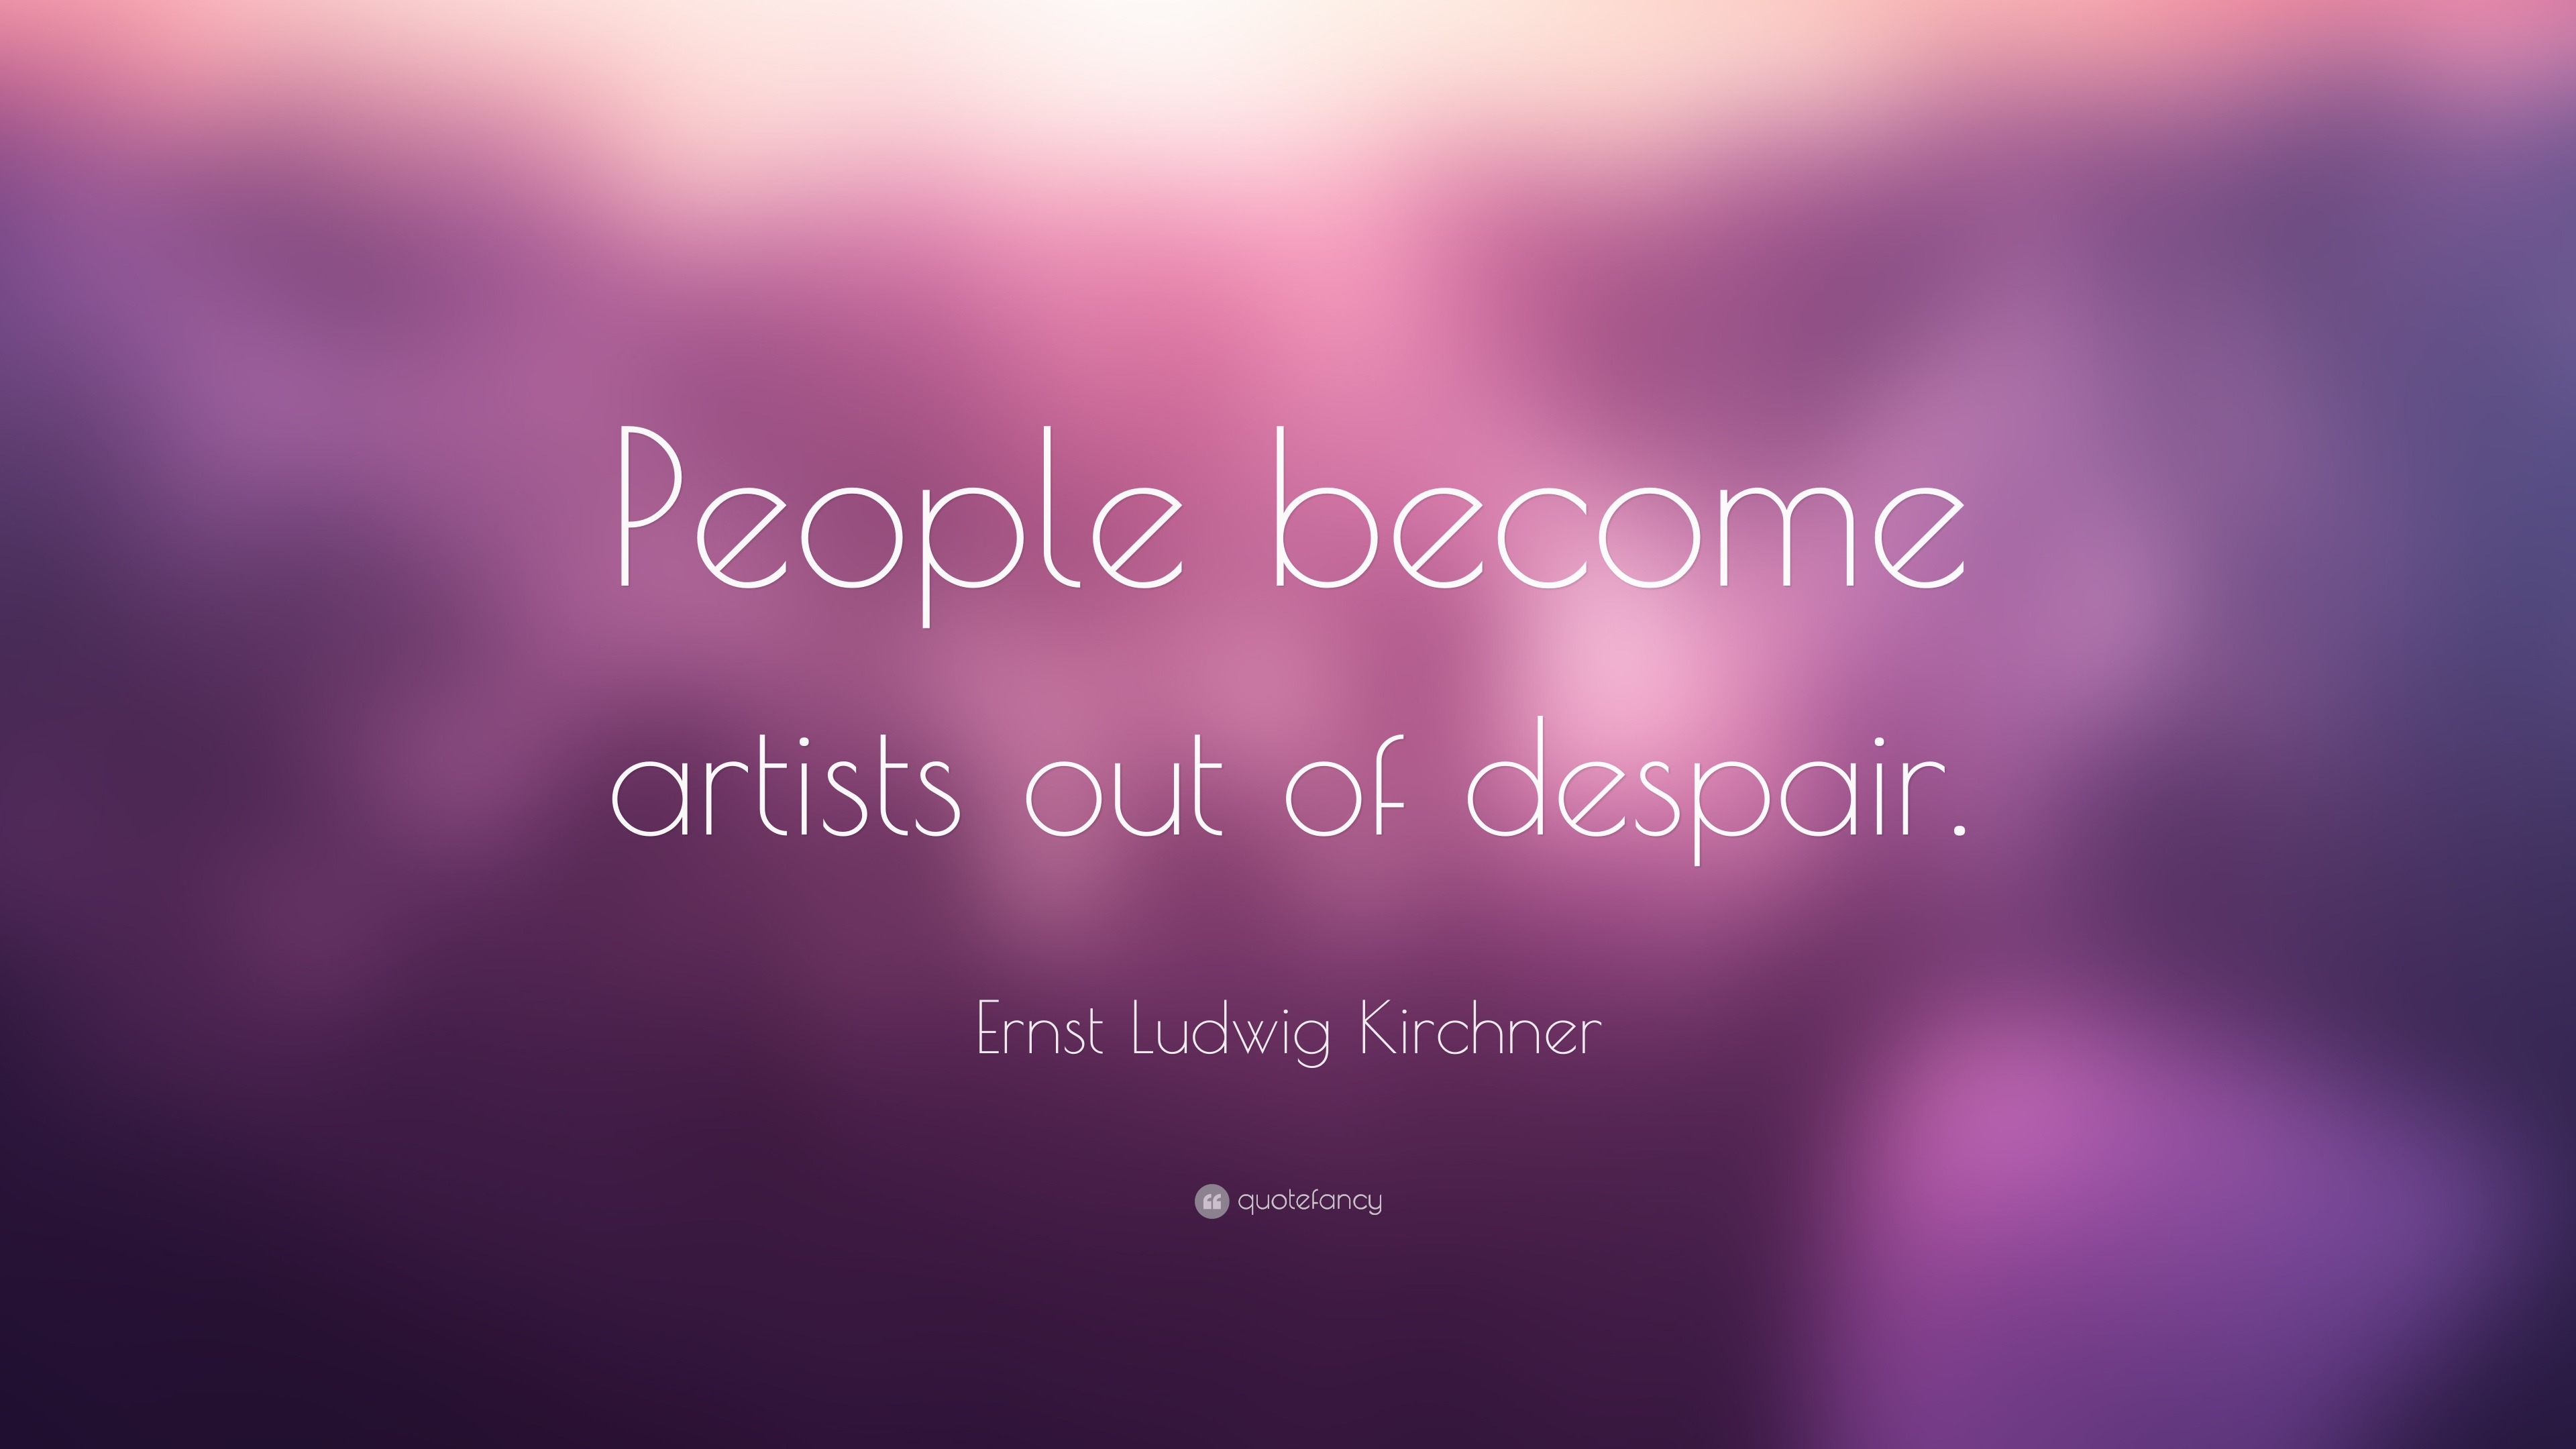 Top 7 Ernst Ludwig Kirchner Quotes 2021 Update Quotefancy